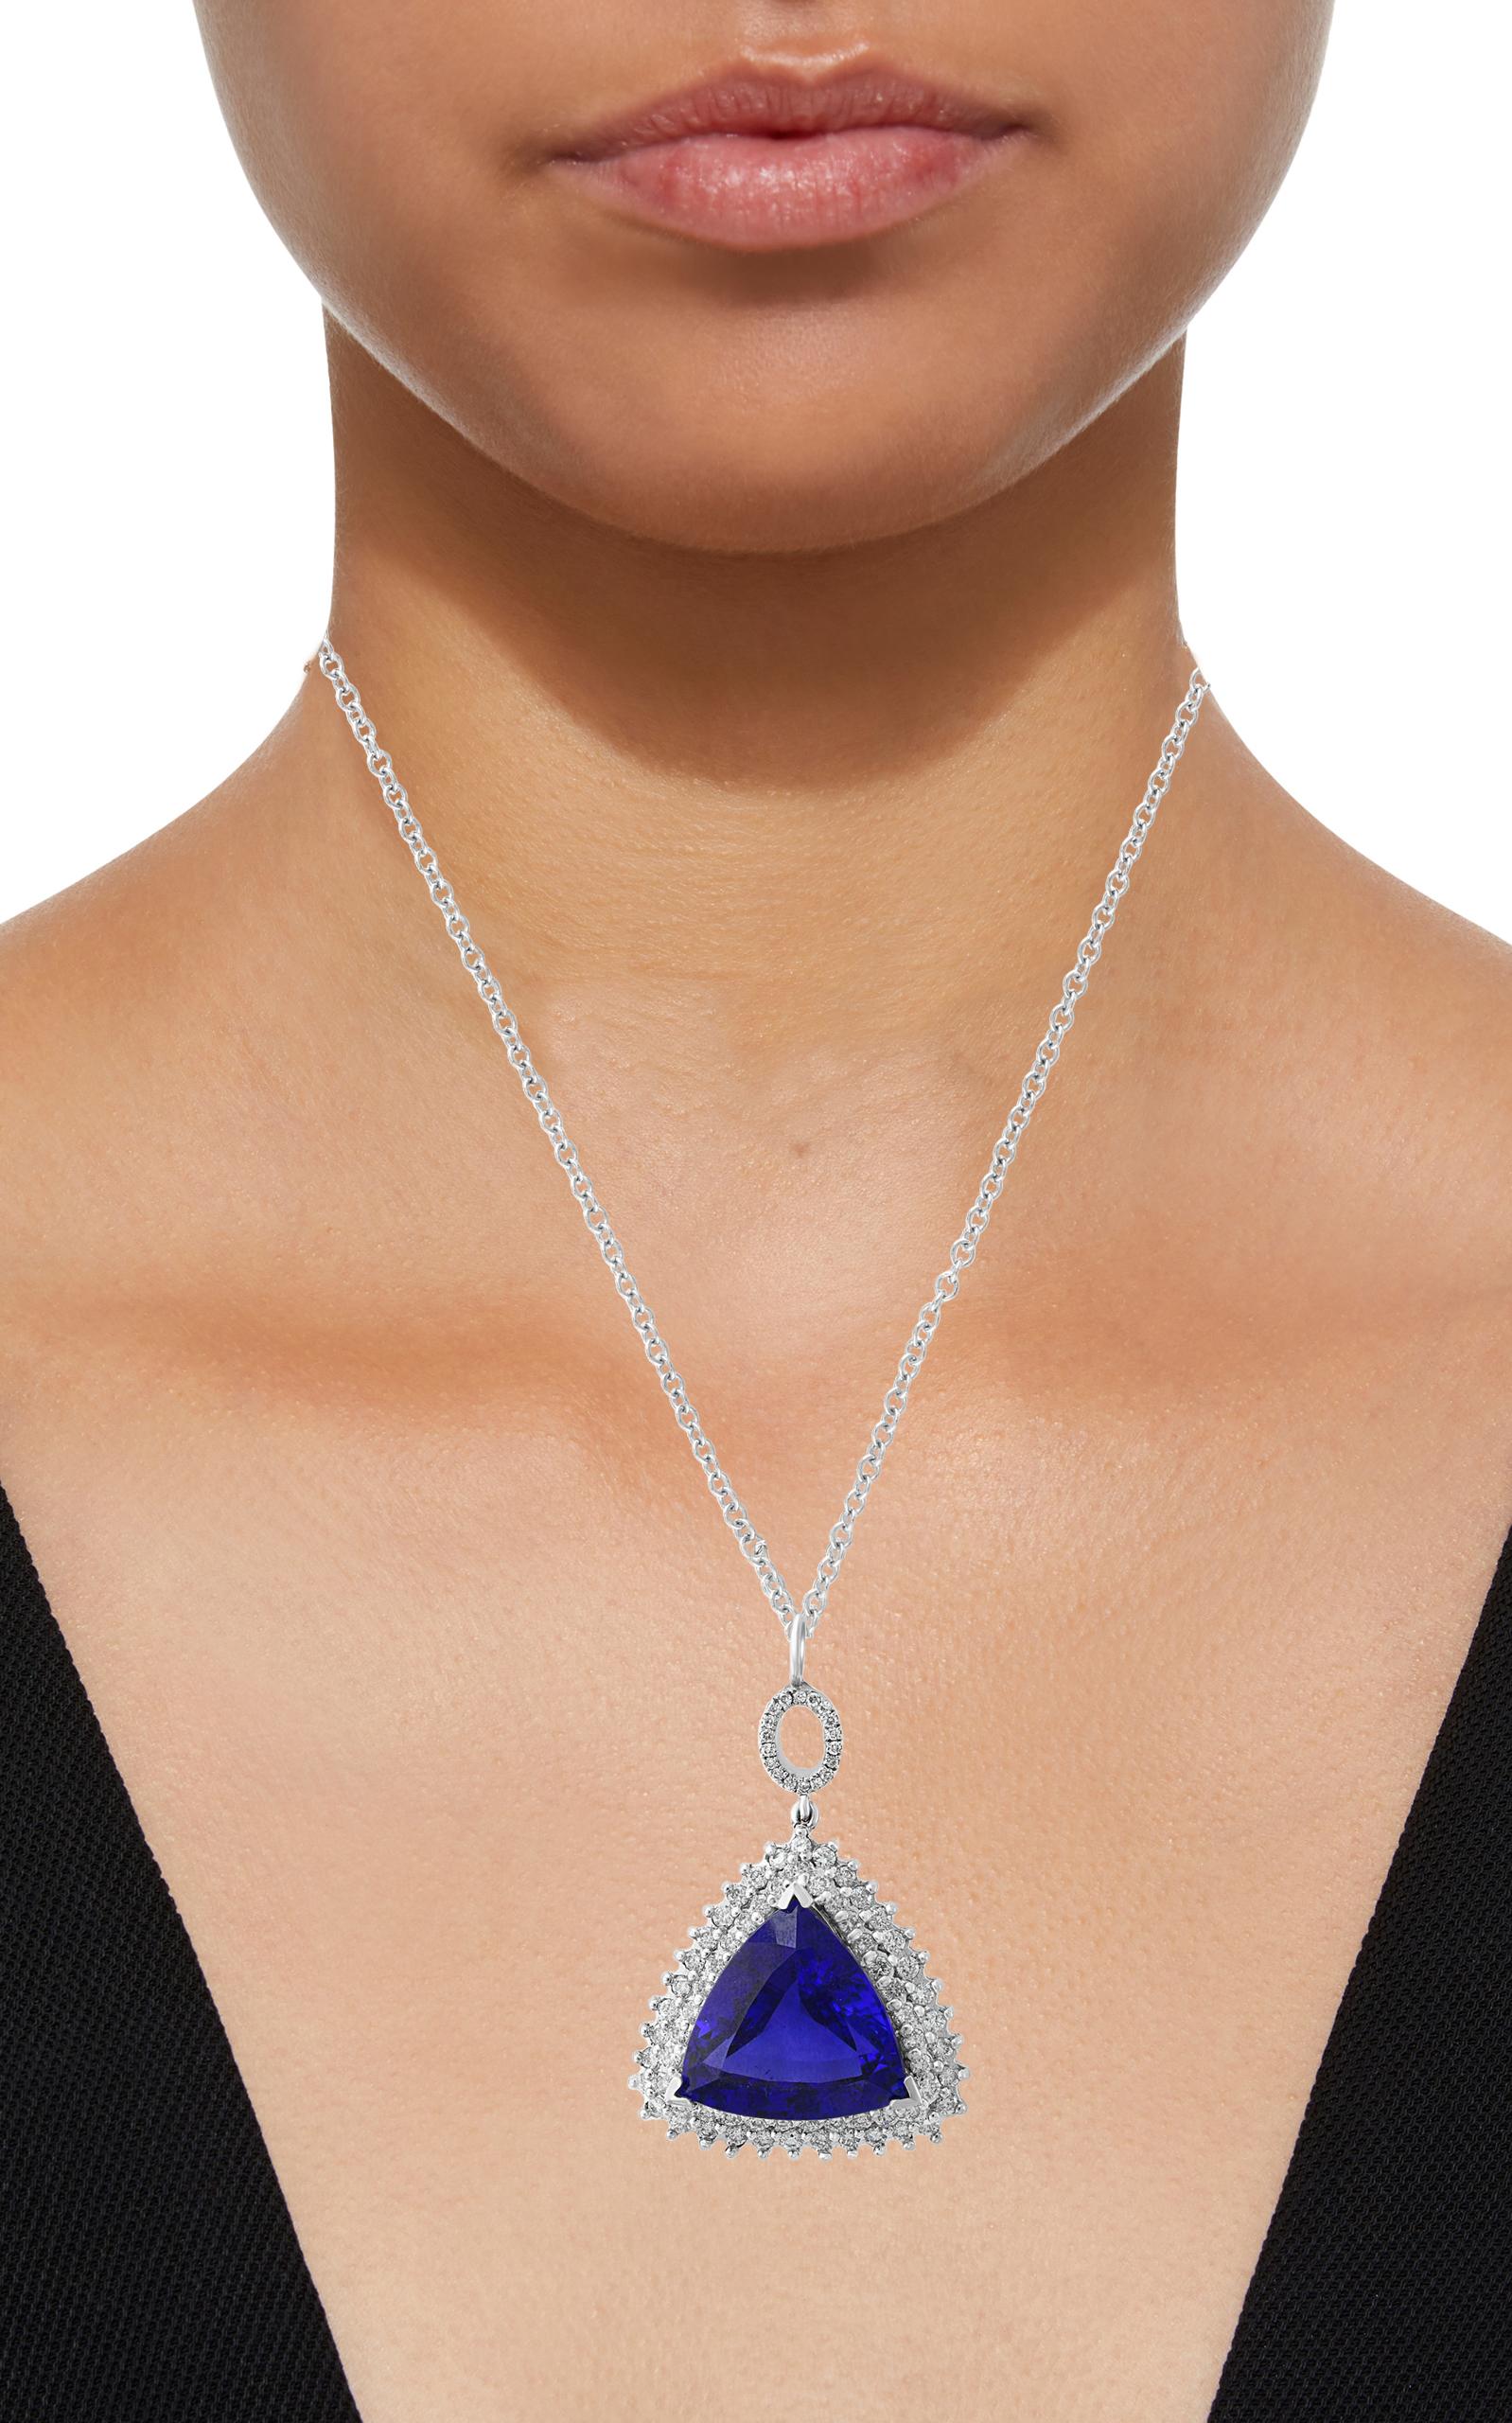 Trillion Cut 17 Carat AAA Tanzanite and Diamond Pendant or Necklace 18 Karat White Gold For Sale